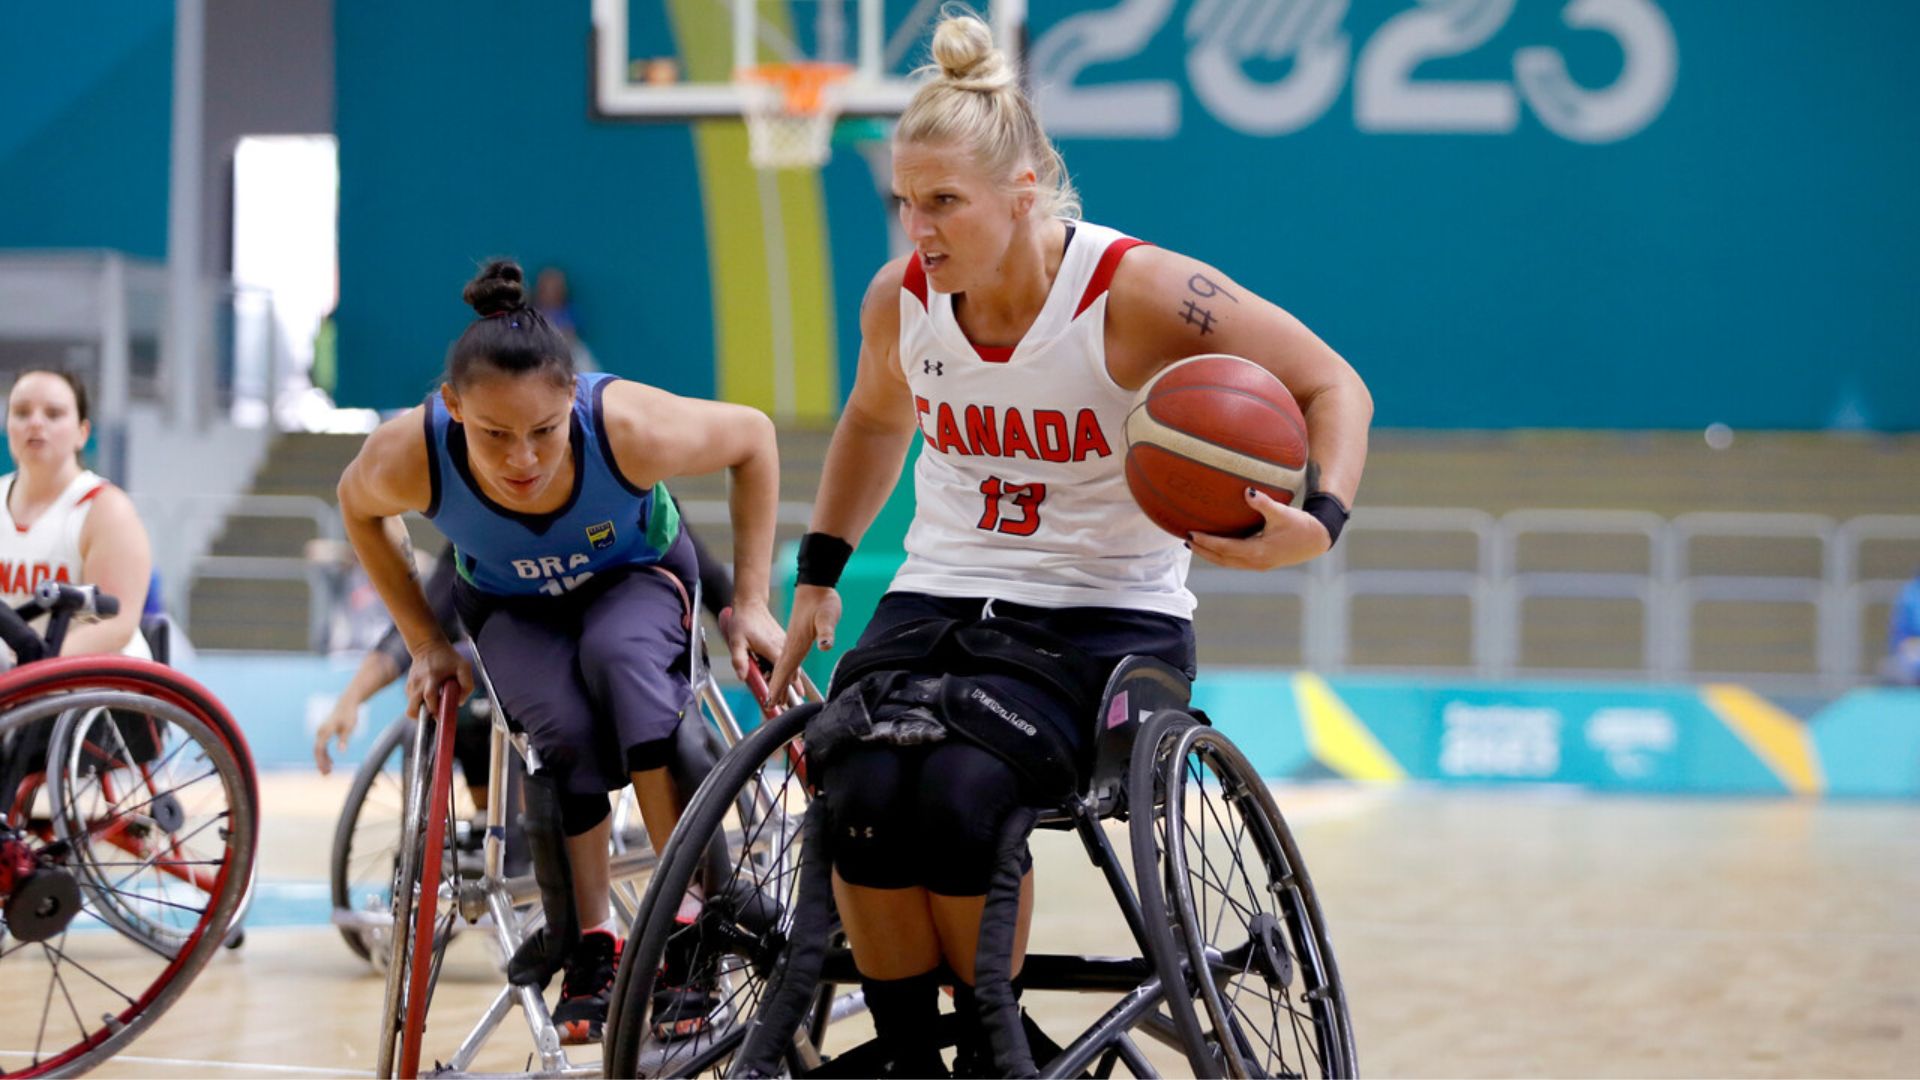 Canada Confirms Its Favoritism in Female's Wheelchair Basketball